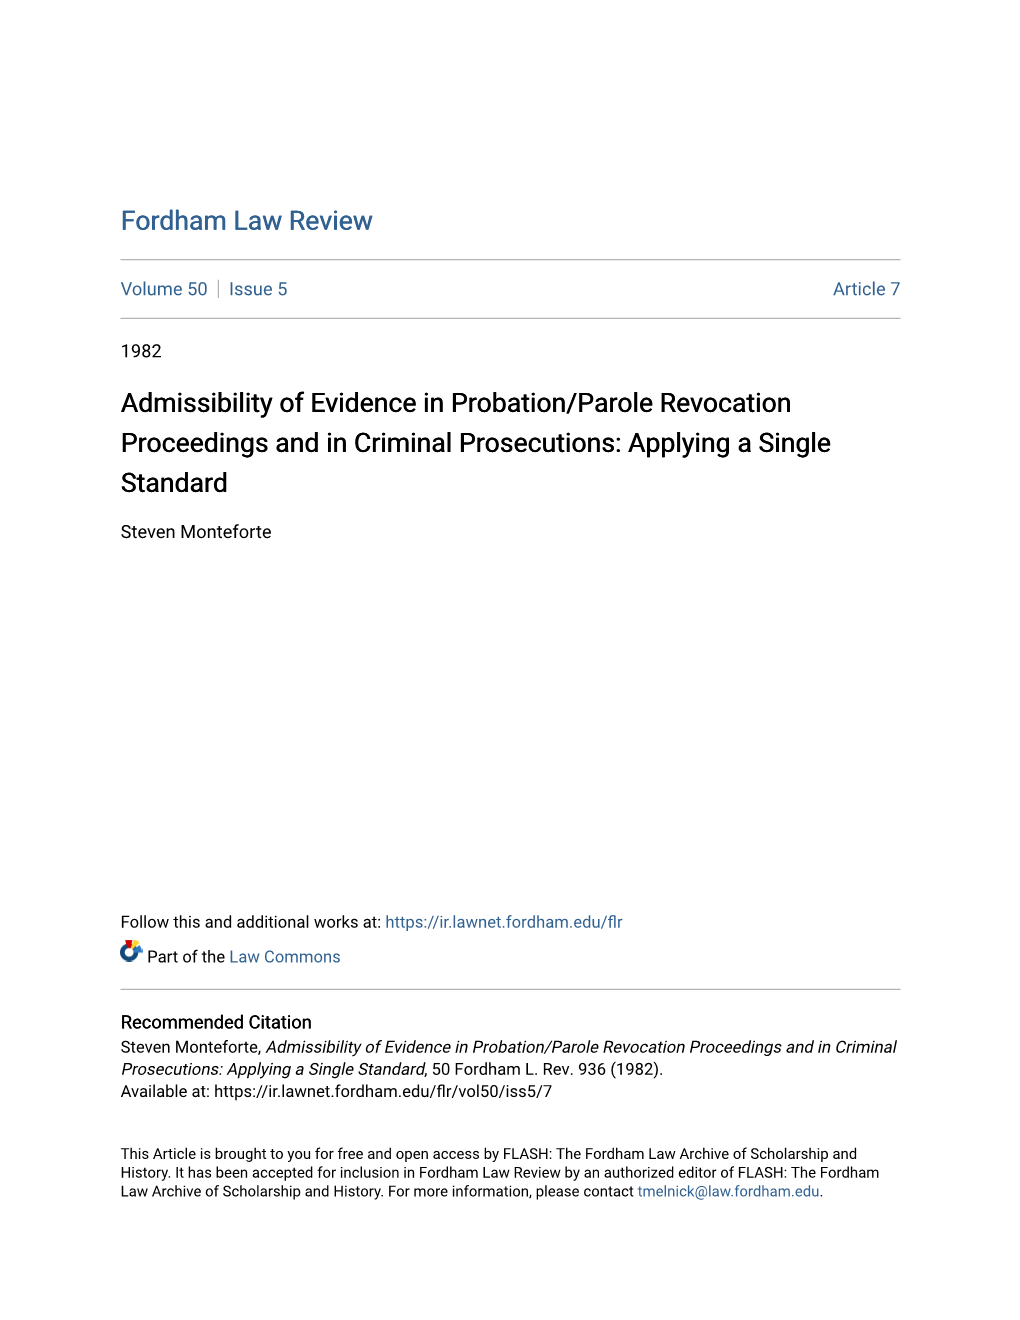 Admissibility of Evidence in Probation/Parole Revocation Proceedings and in Criminal Prosecutions: Applying a Single Standard